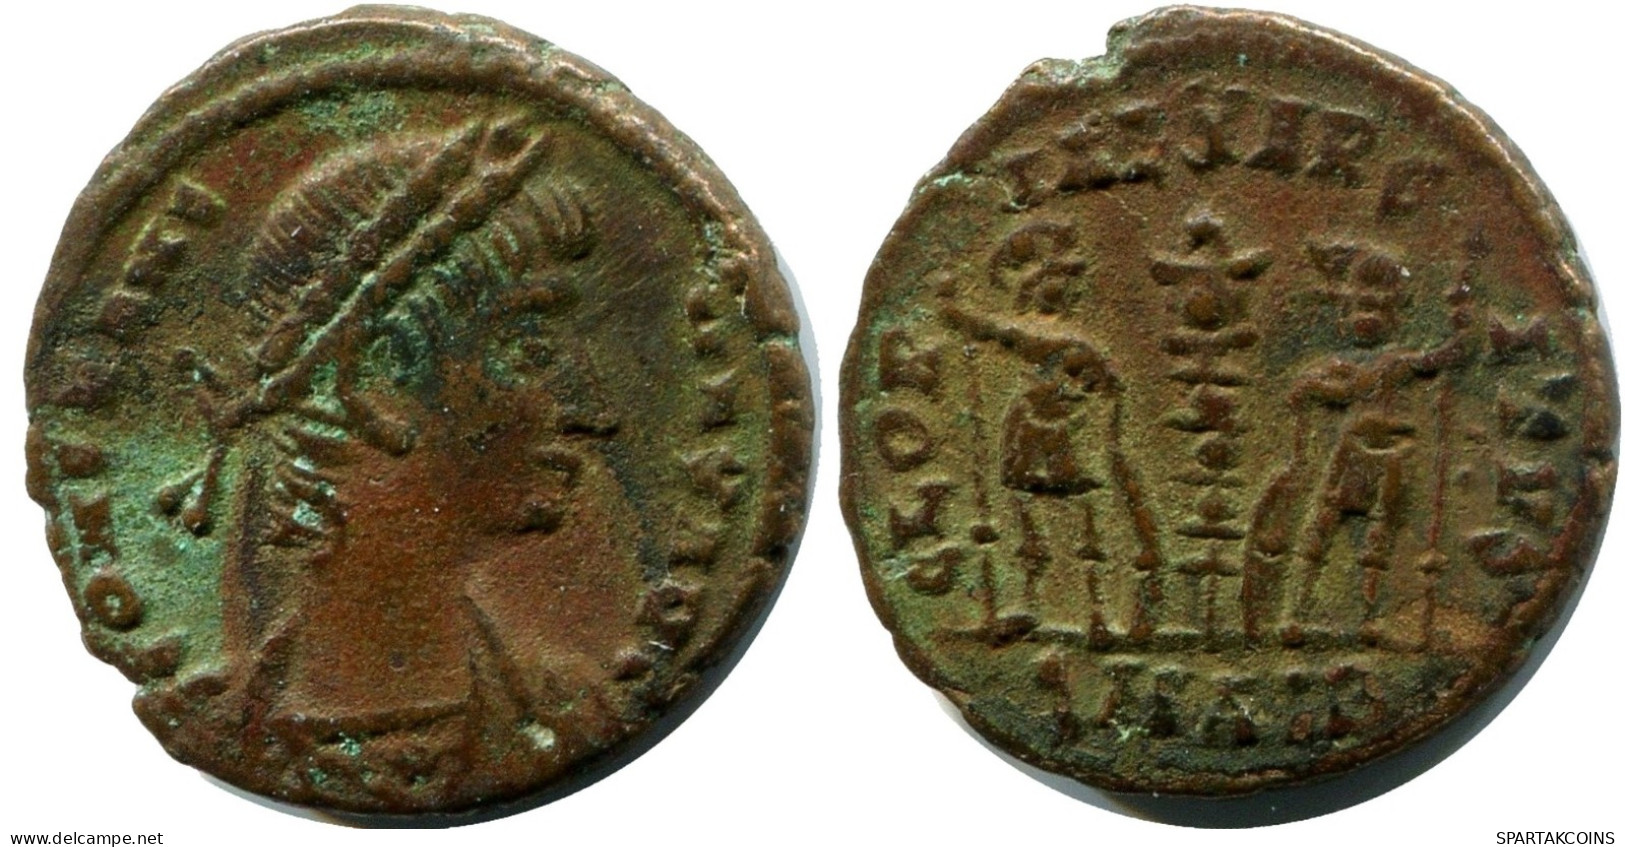 CONSTANS MINTED IN ALEKSANDRIA FROM THE ROYAL ONTARIO MUSEUM #ANC11394.14.D.A - El Imperio Christiano (307 / 363)